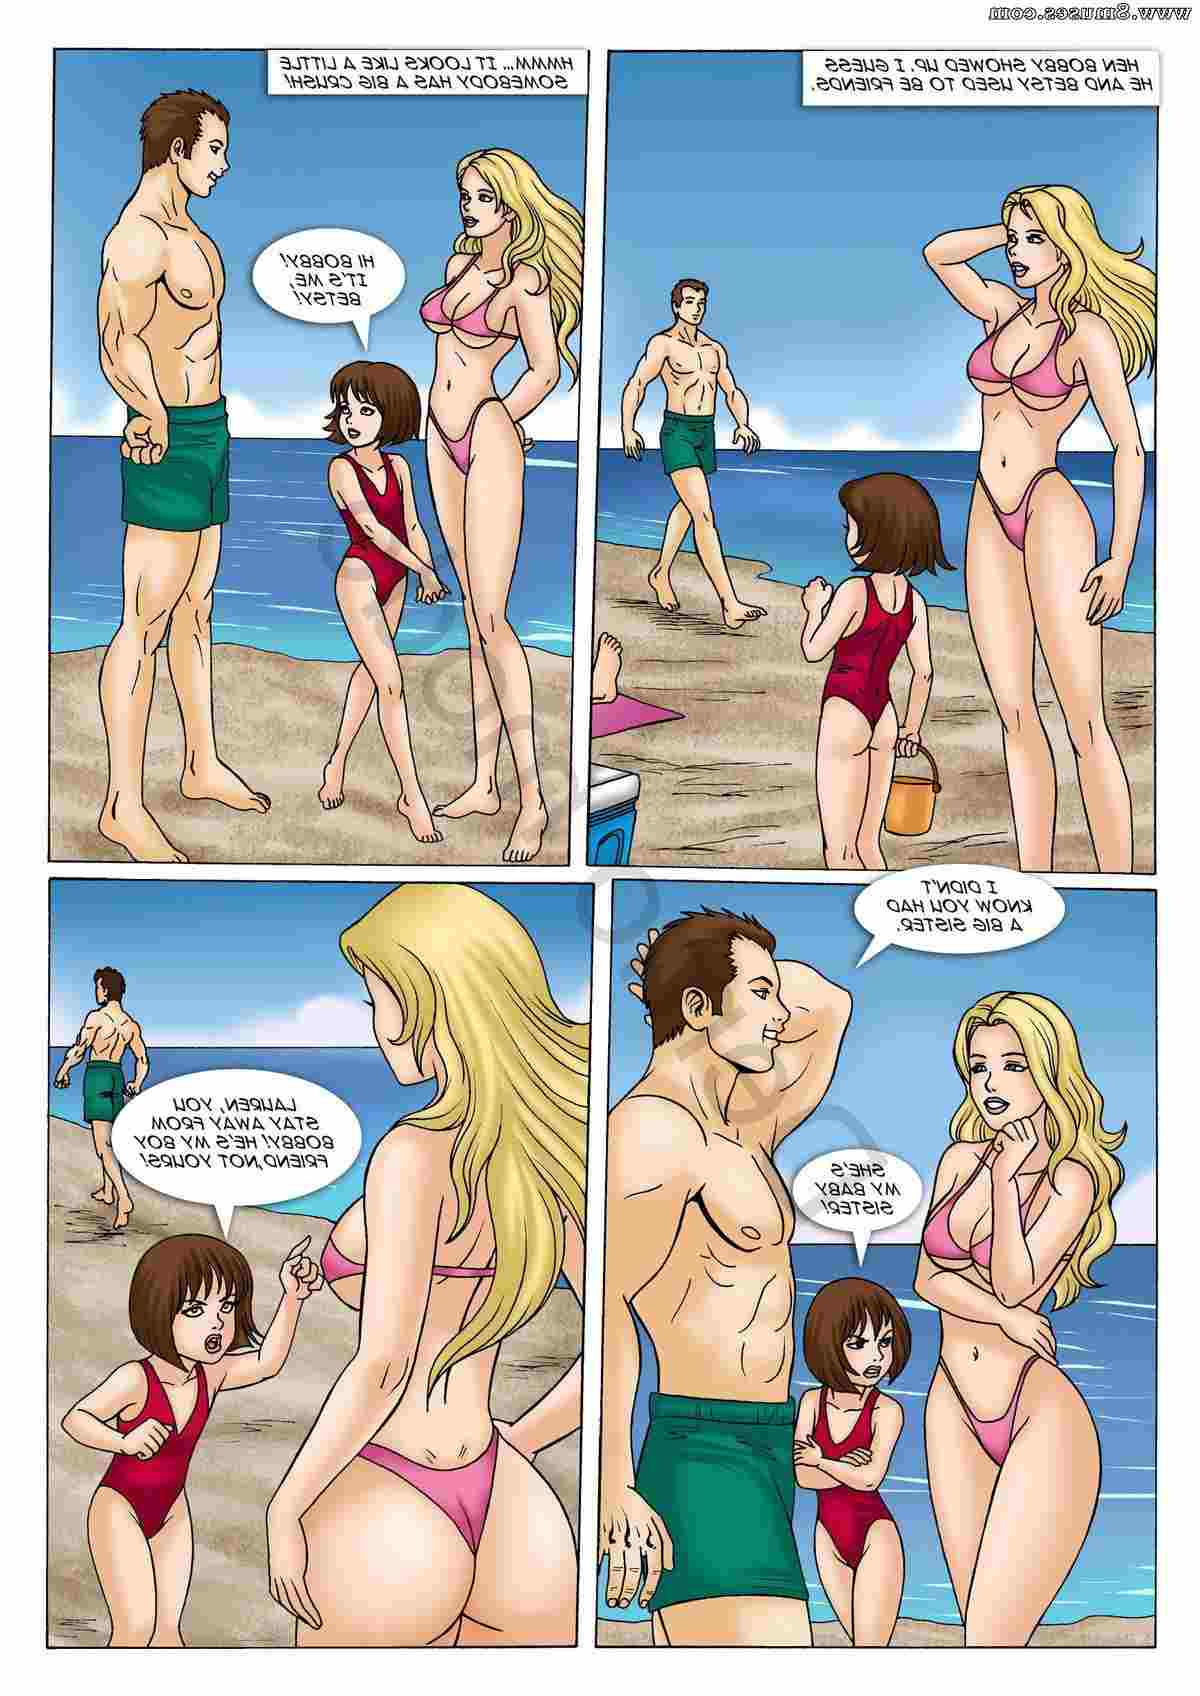 DreamTales-Comics/A-Tale-of-Two-Sisters A_Tale_of_Two_Sisters__8muses_-_Sex_and_Porn_Comics_11.jpg